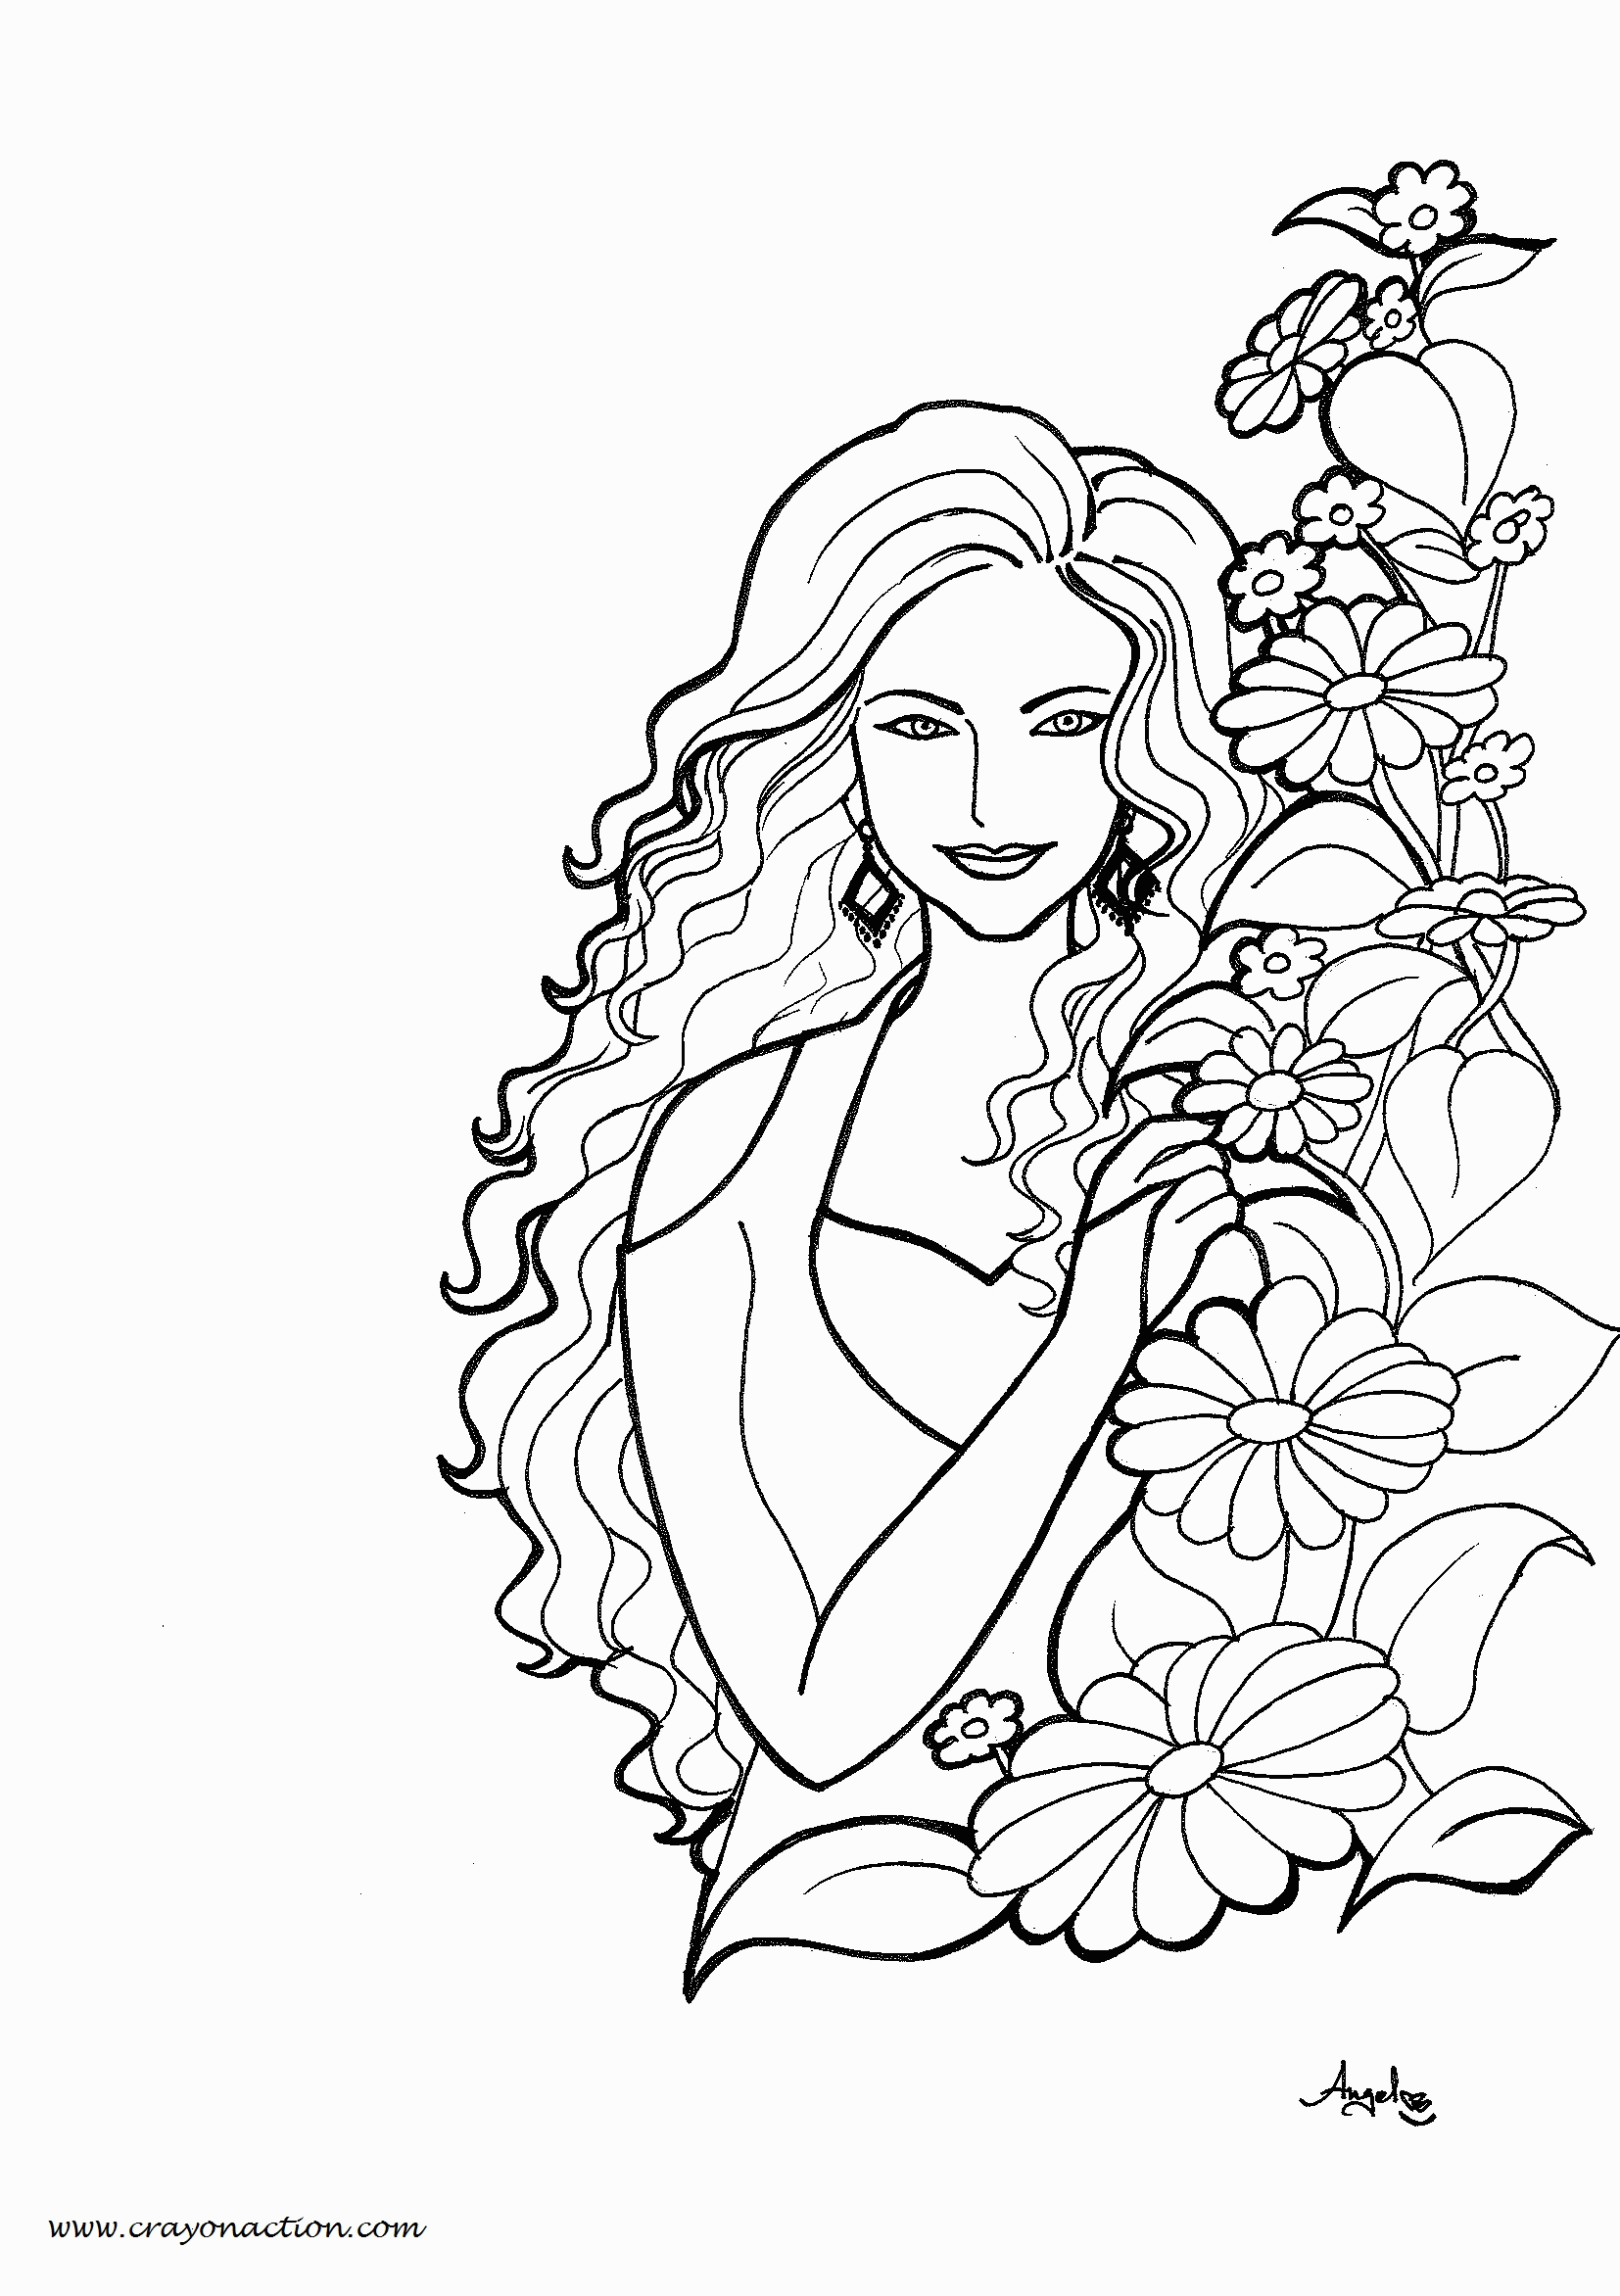 11 Pics of Beautiful Women Coloring Pages - Beautiful Adult ...